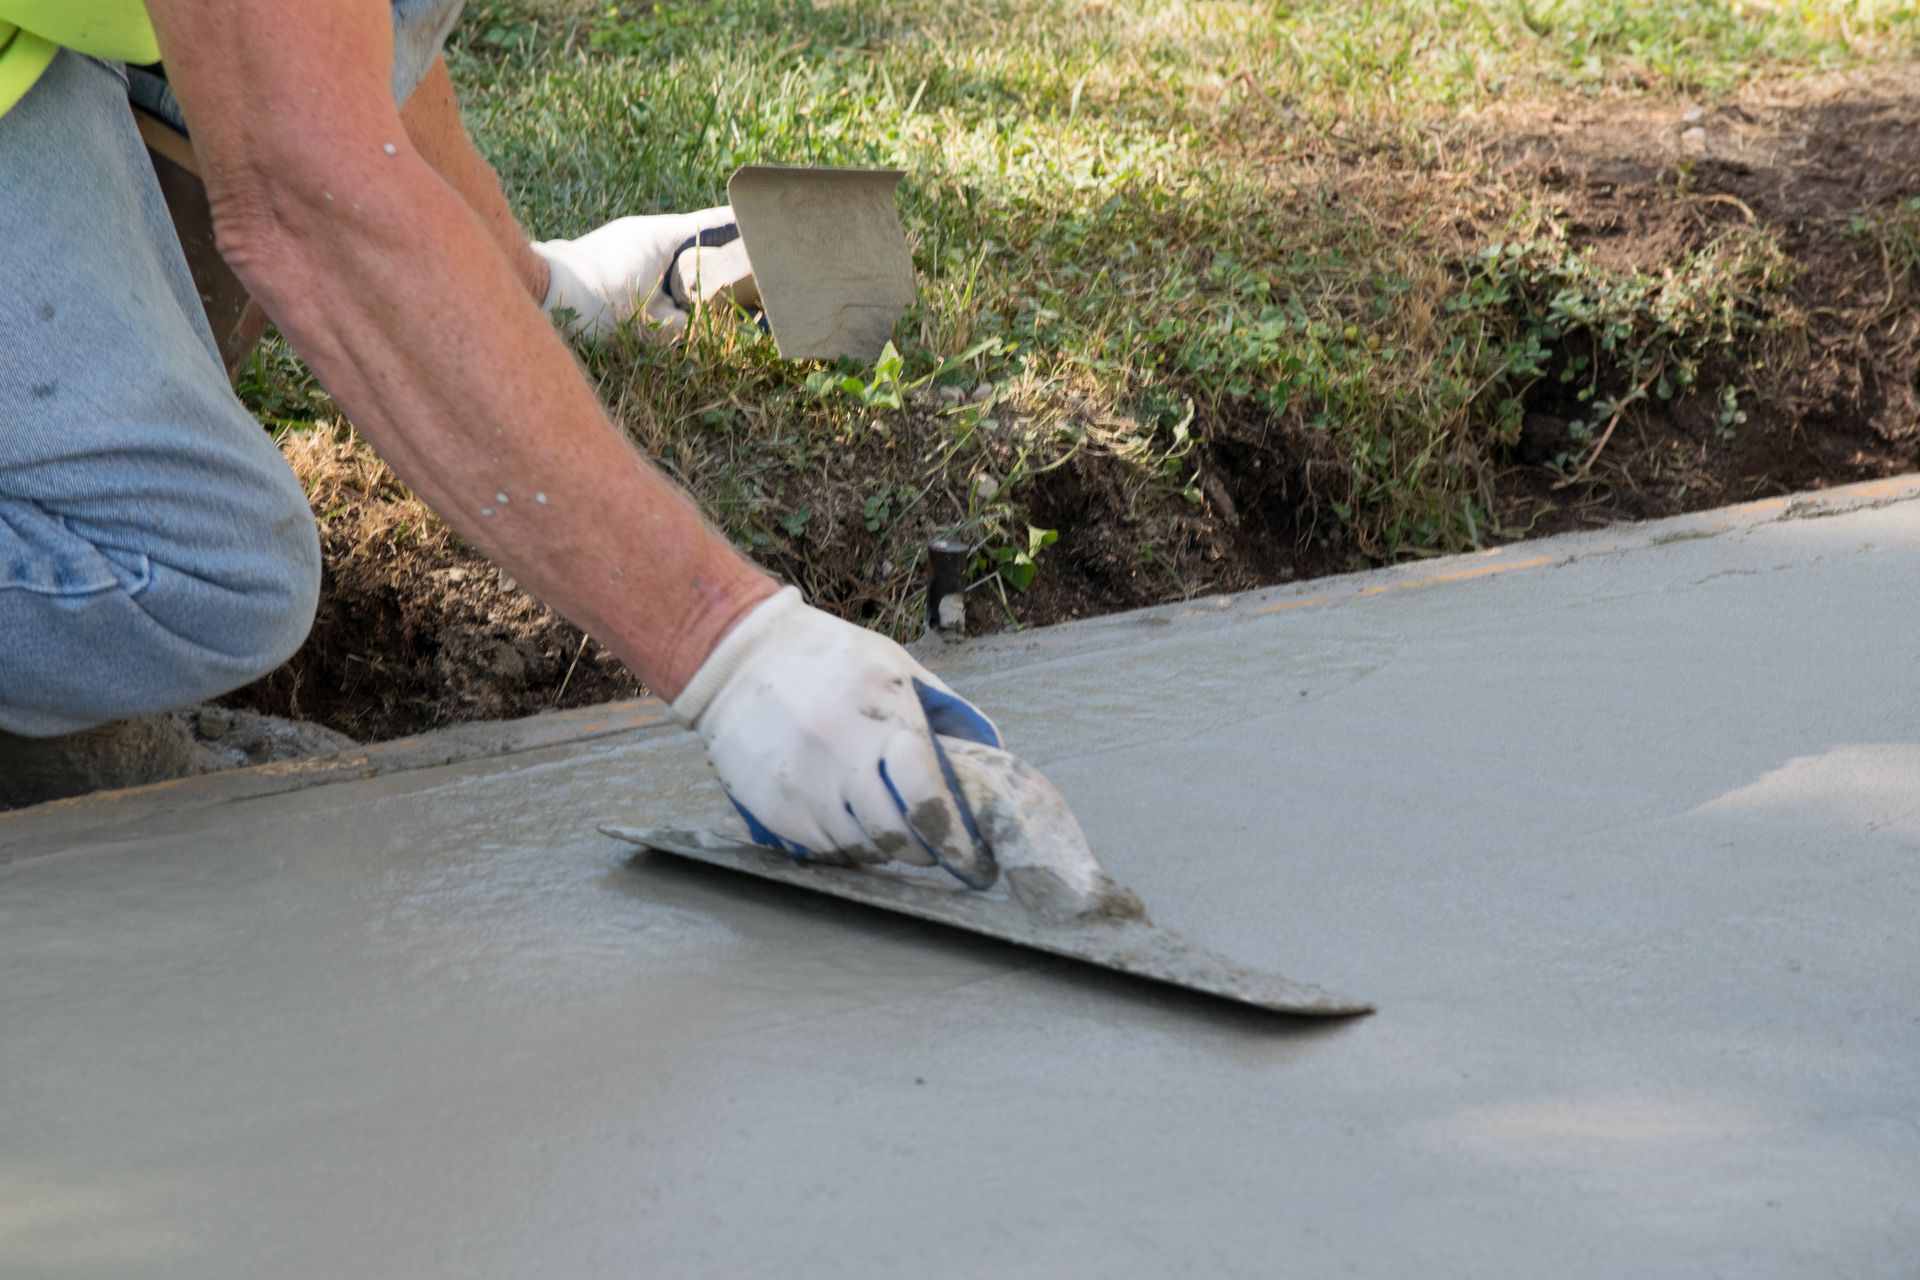 a man is kneeling down and using a trowel to spread concrete on a sidewalk .